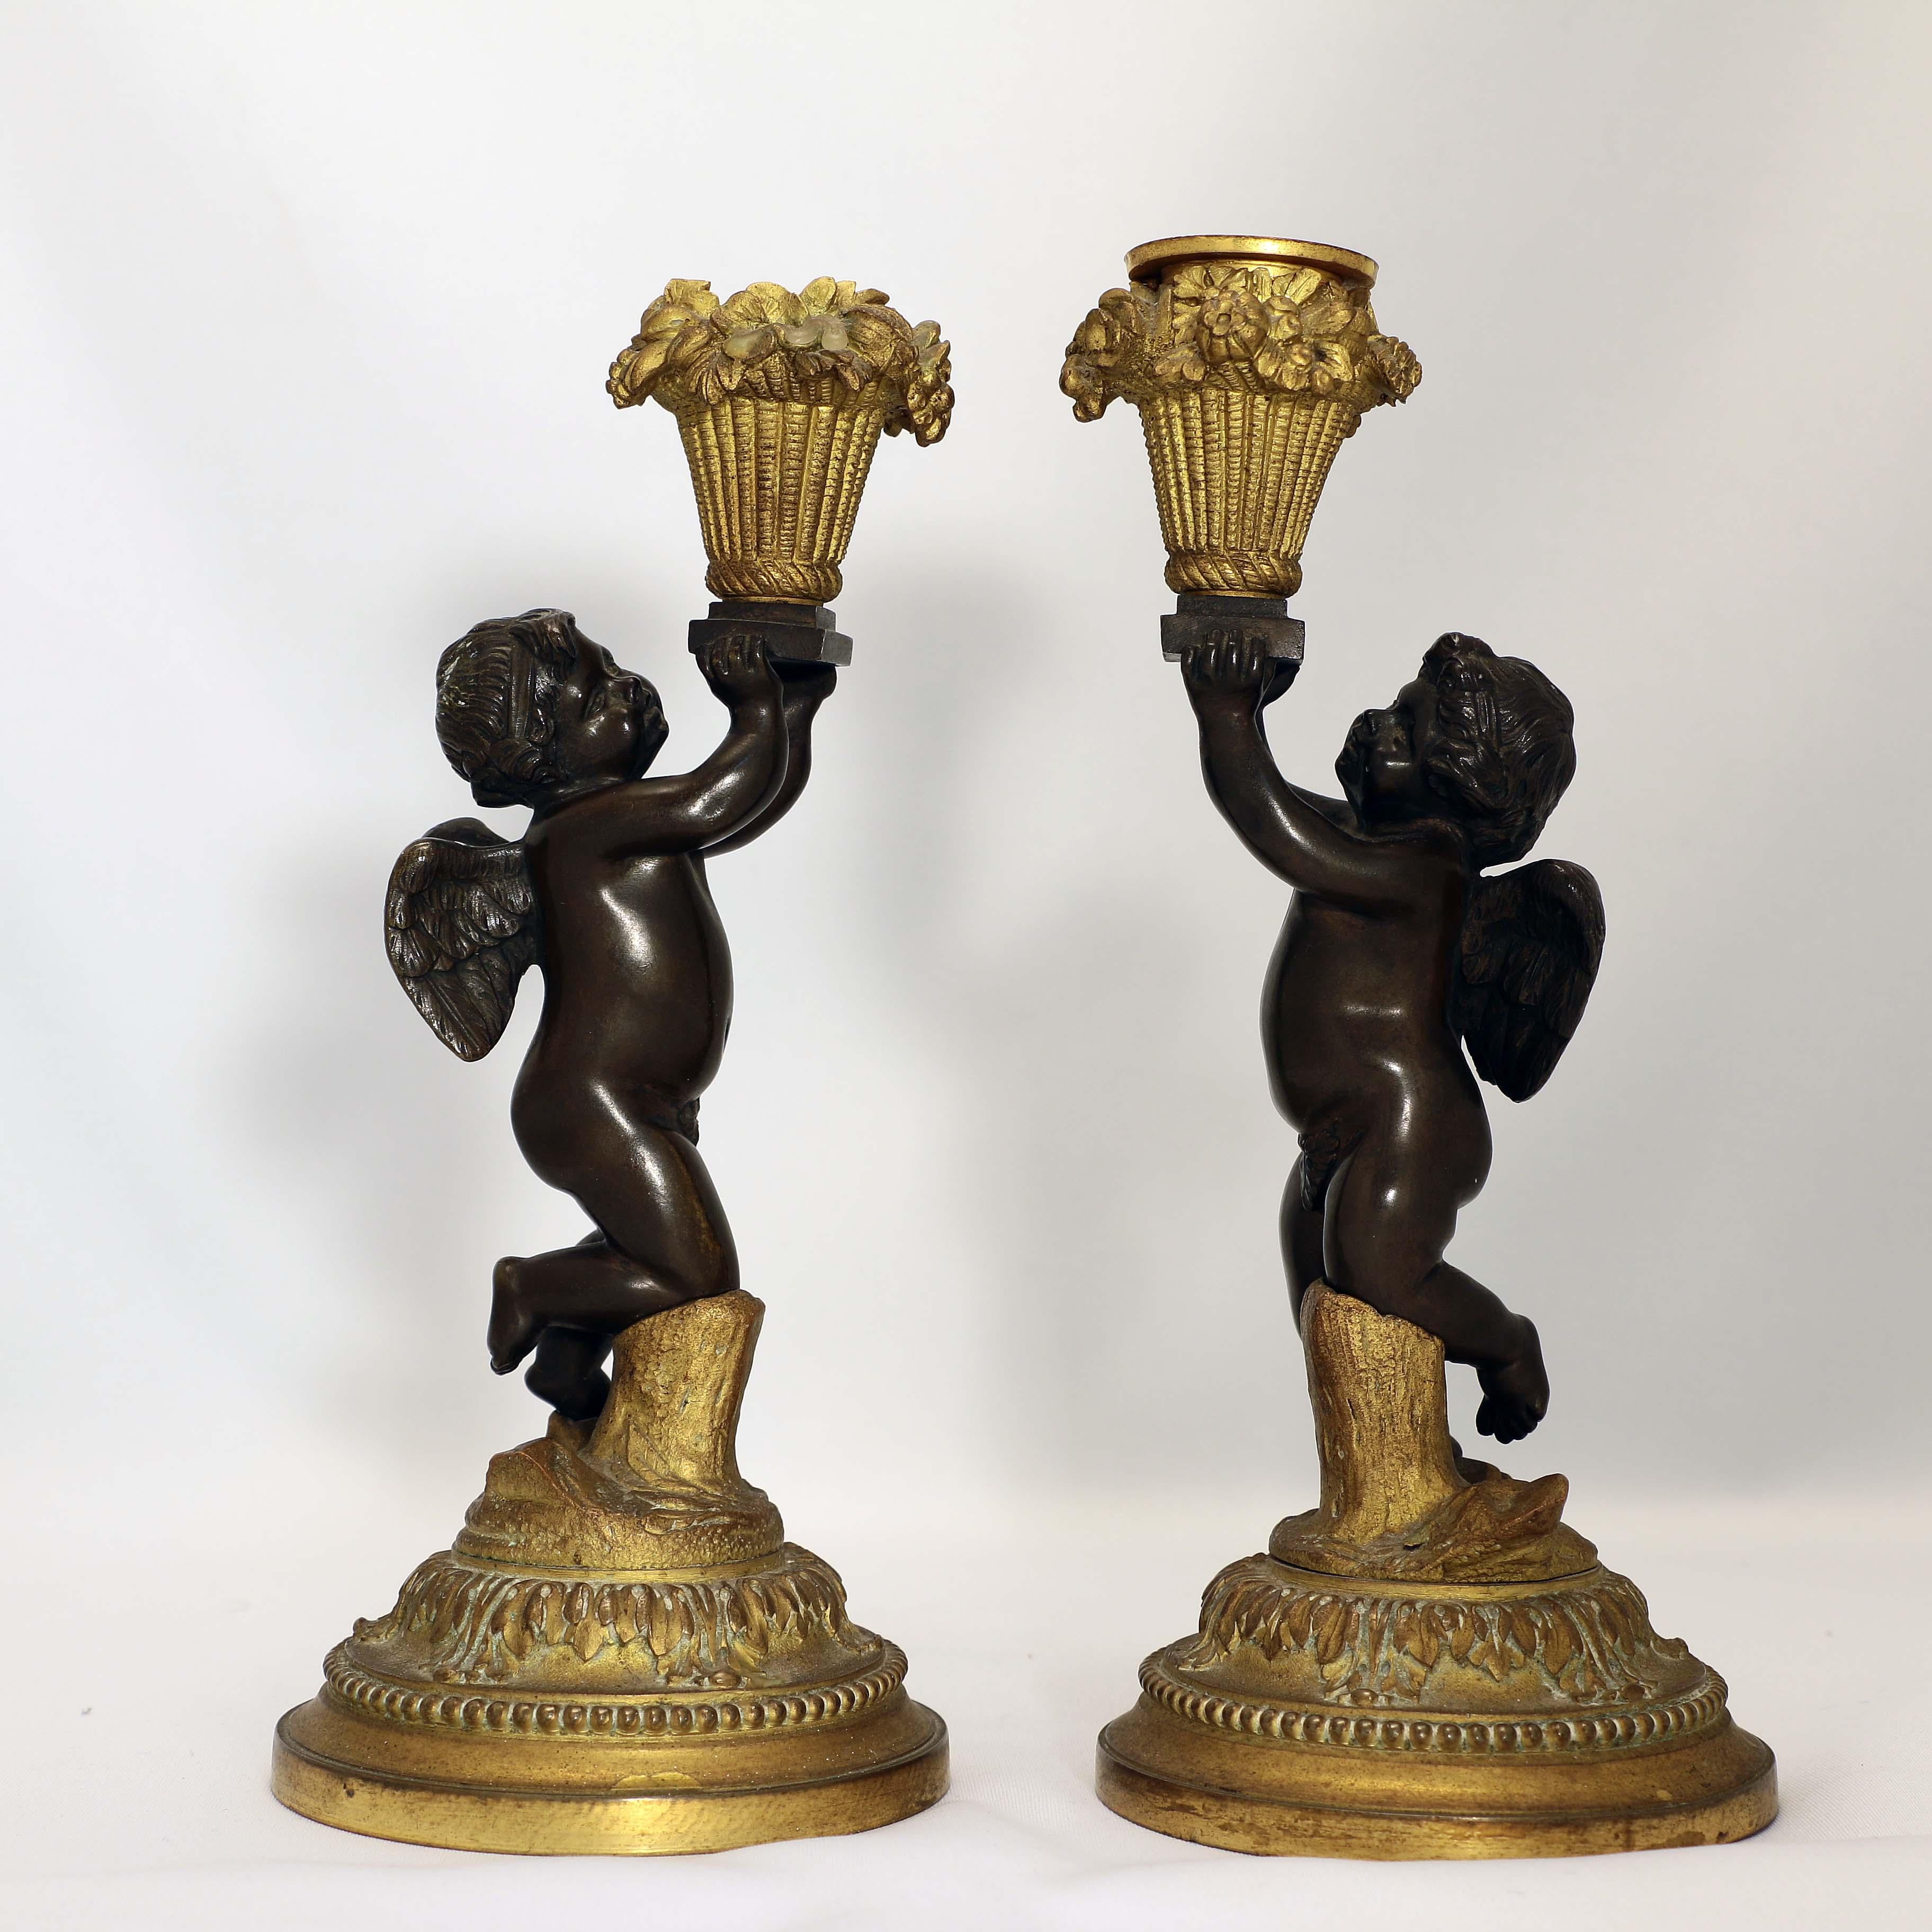 Late 19th Century Pair of French Louis XV Style Candlesticks, Modelled as Cherubs with Baskets